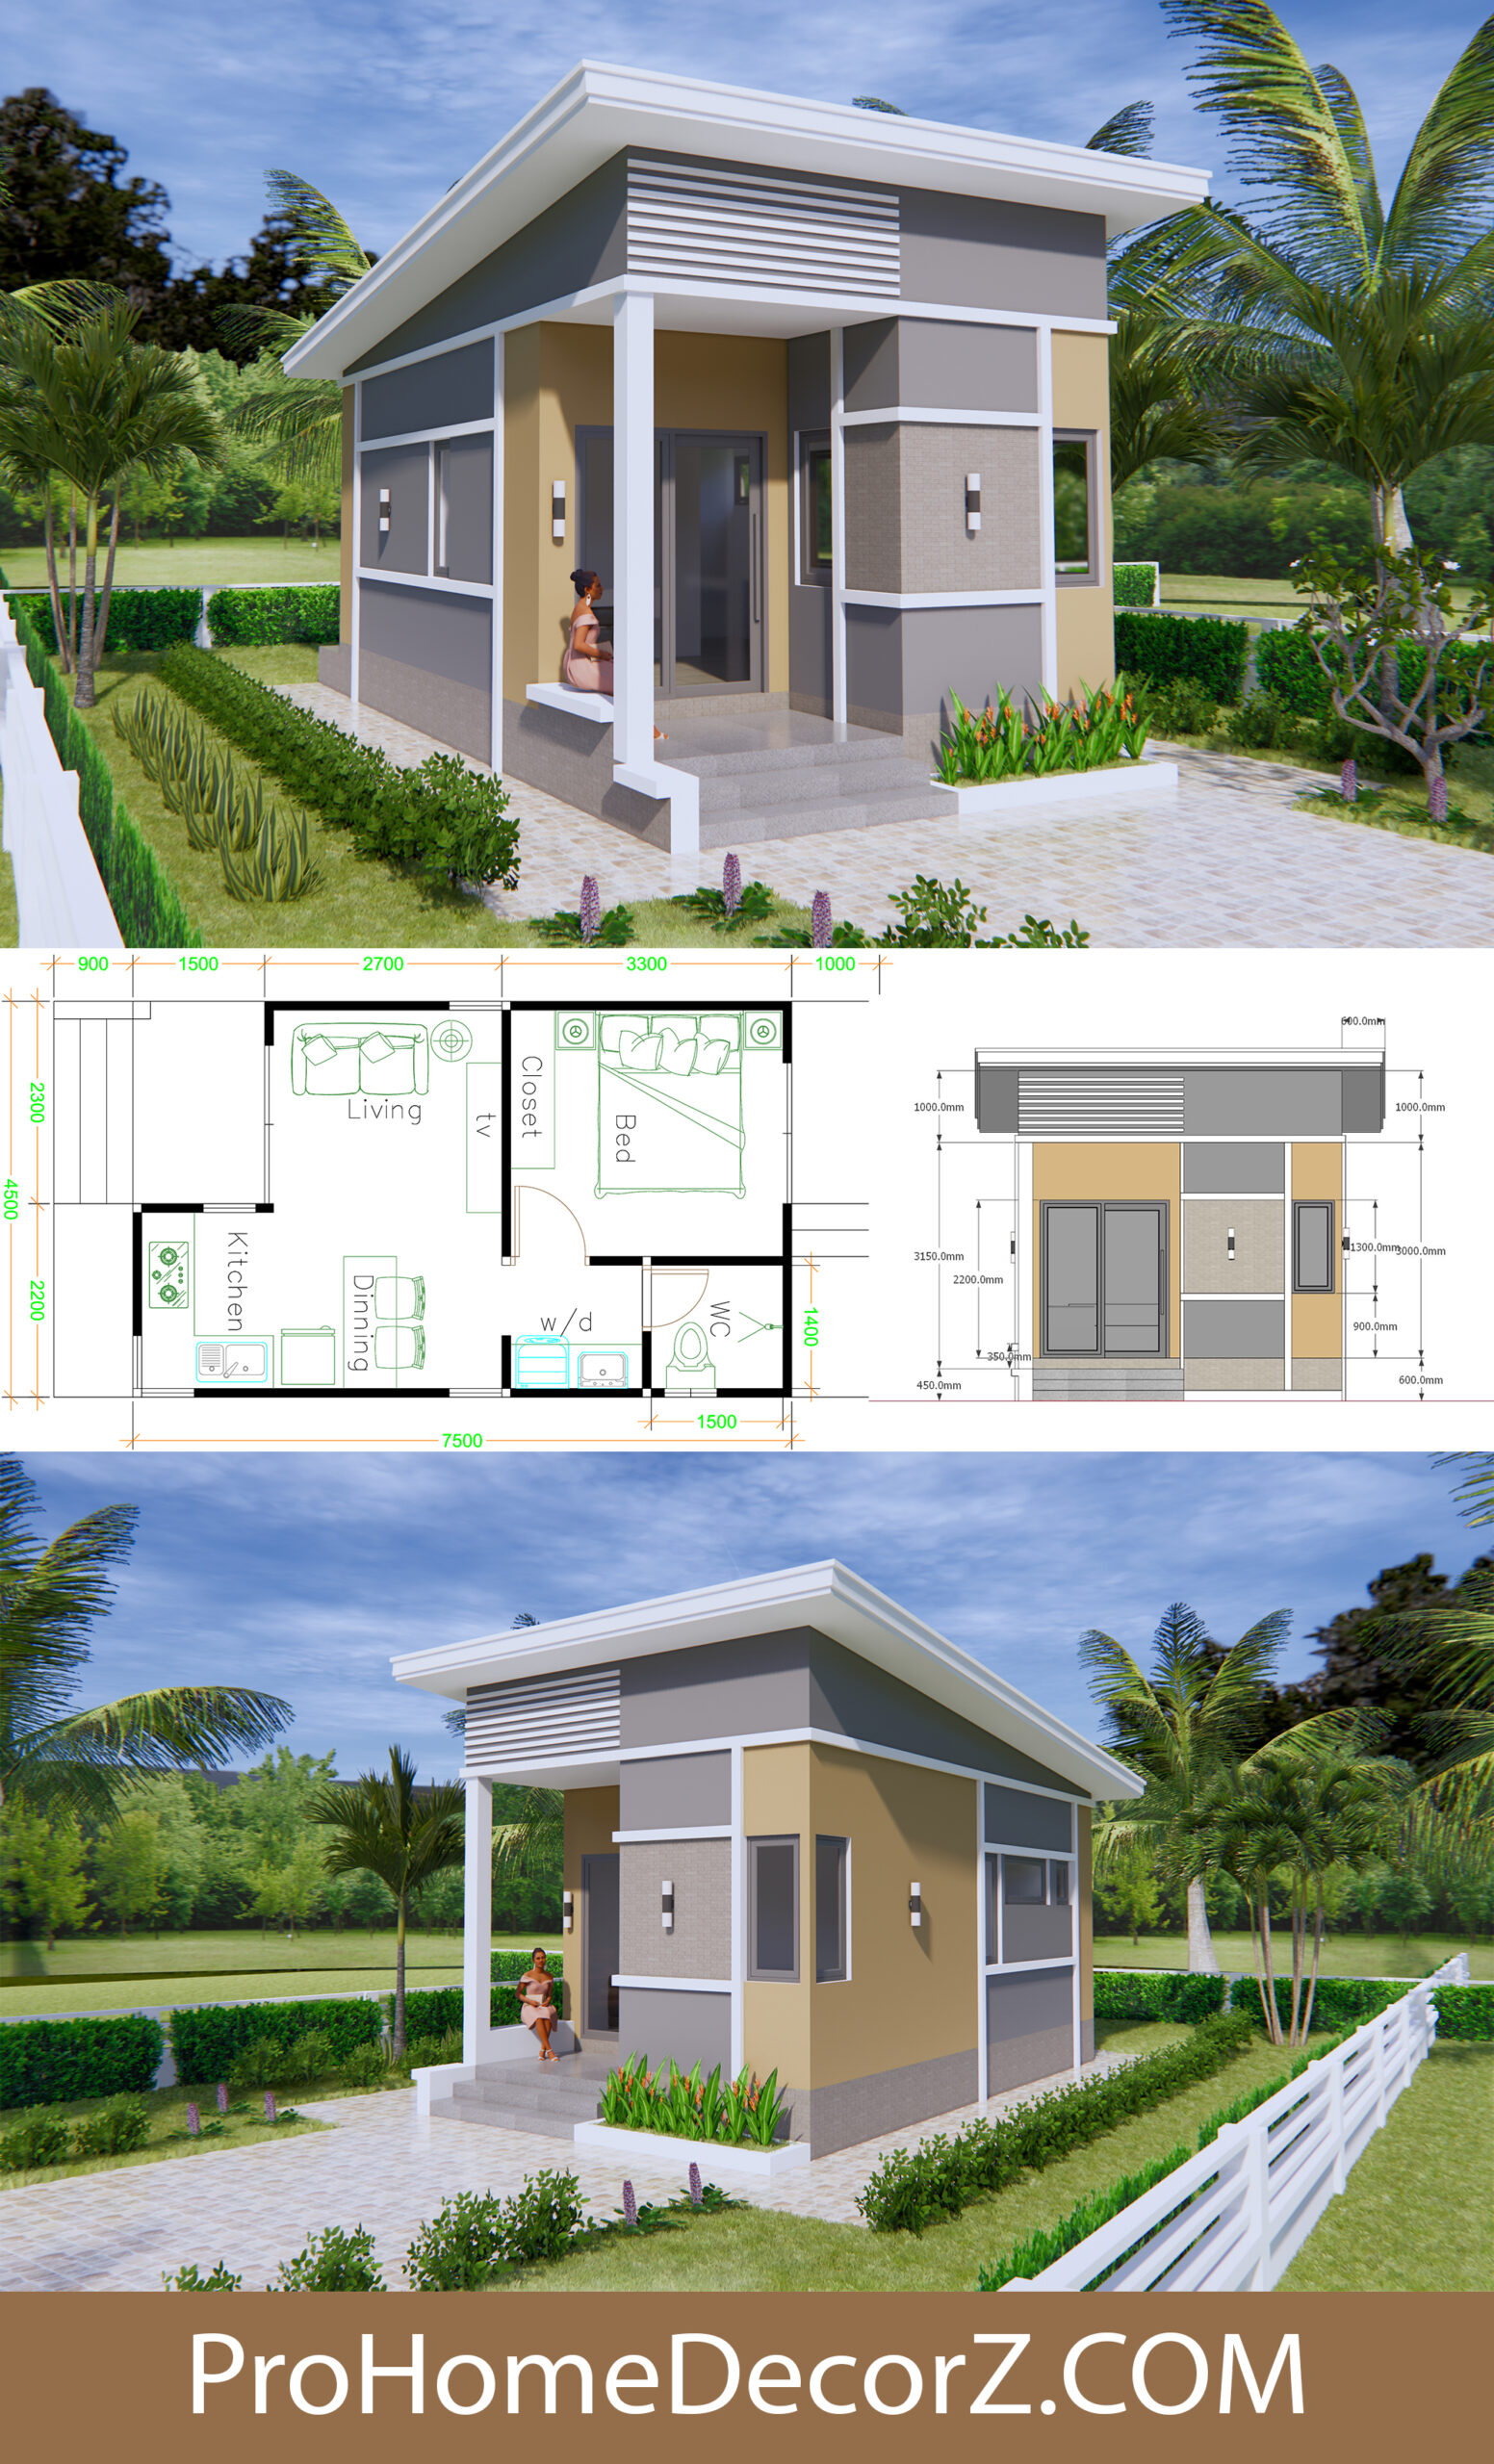 Shed Tiny House Plan 4.5x7.5m One Bed